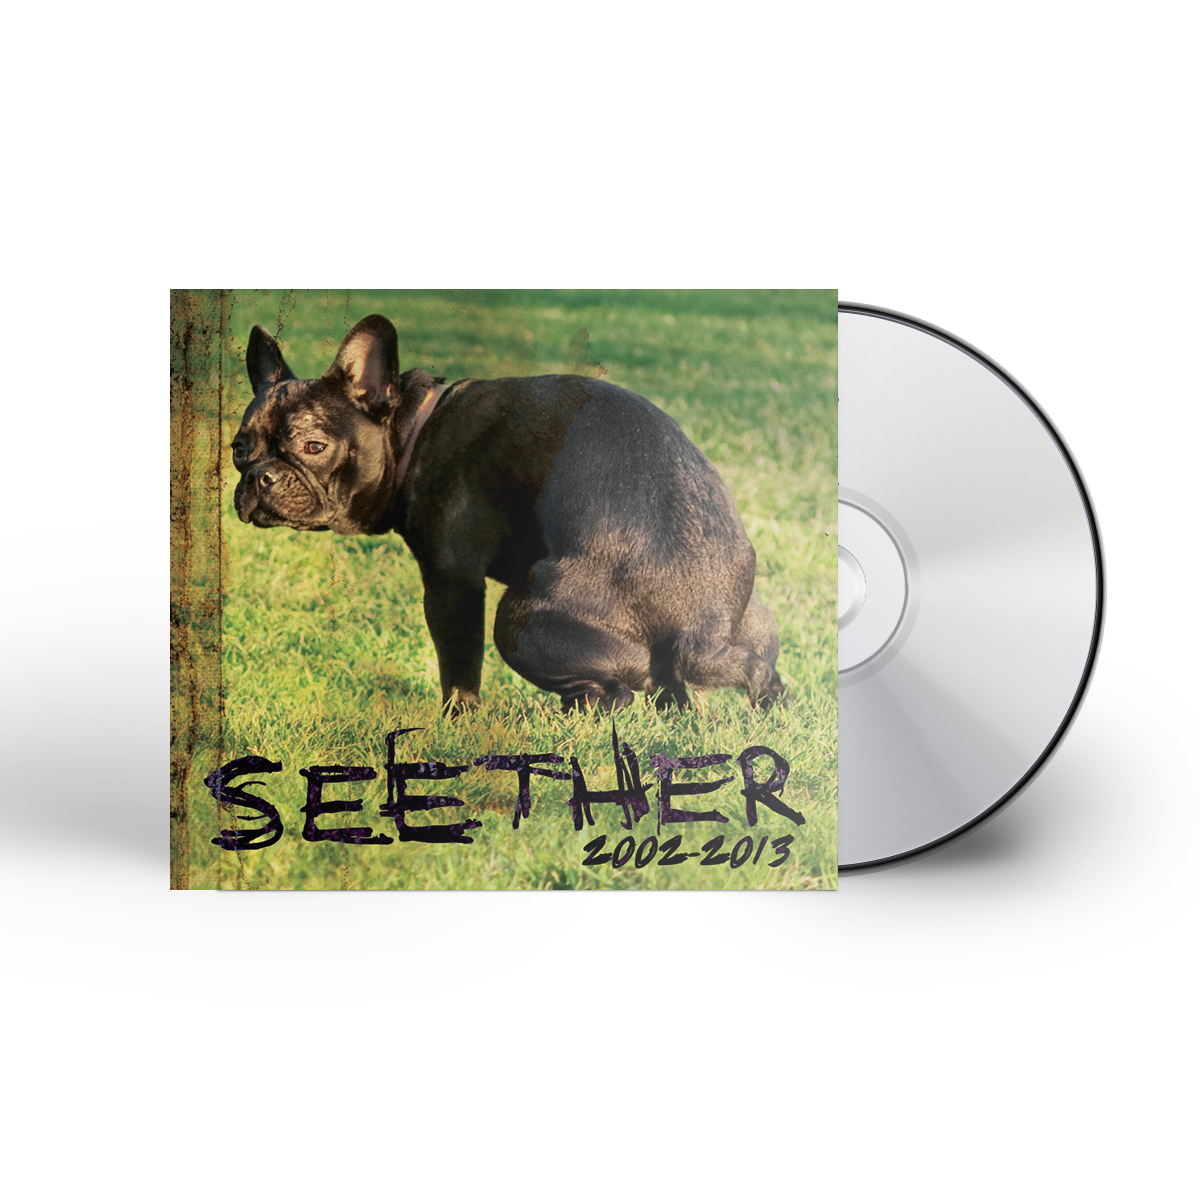 Seether - 2002-2013 2xCD